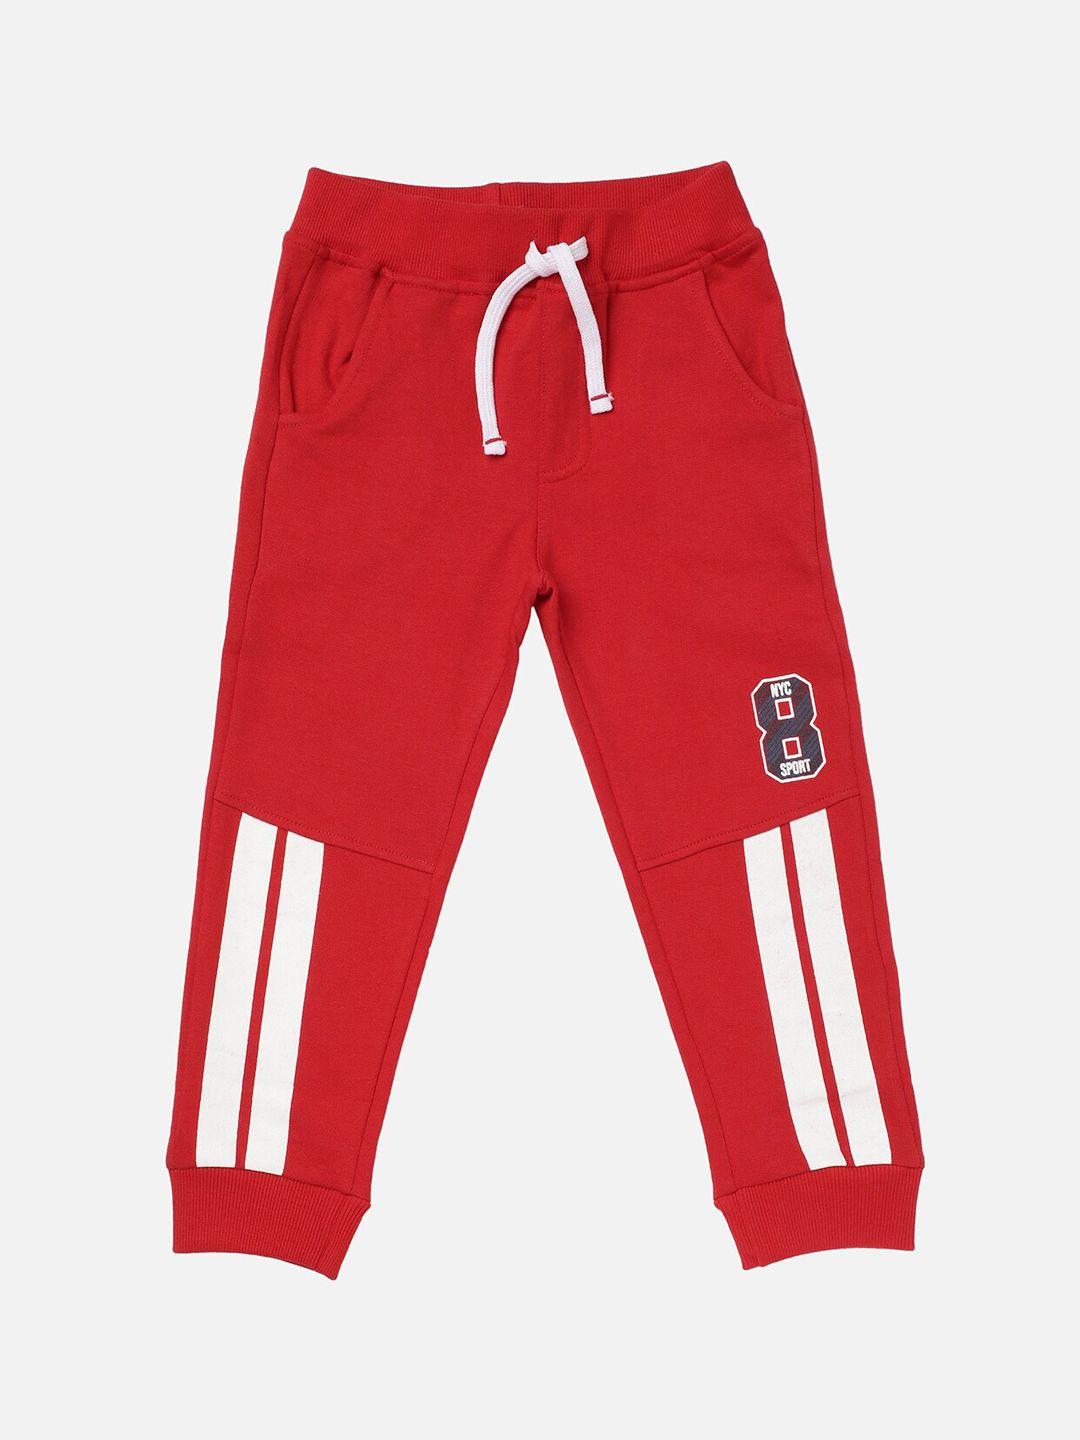 r&b boys red & white striped joggers